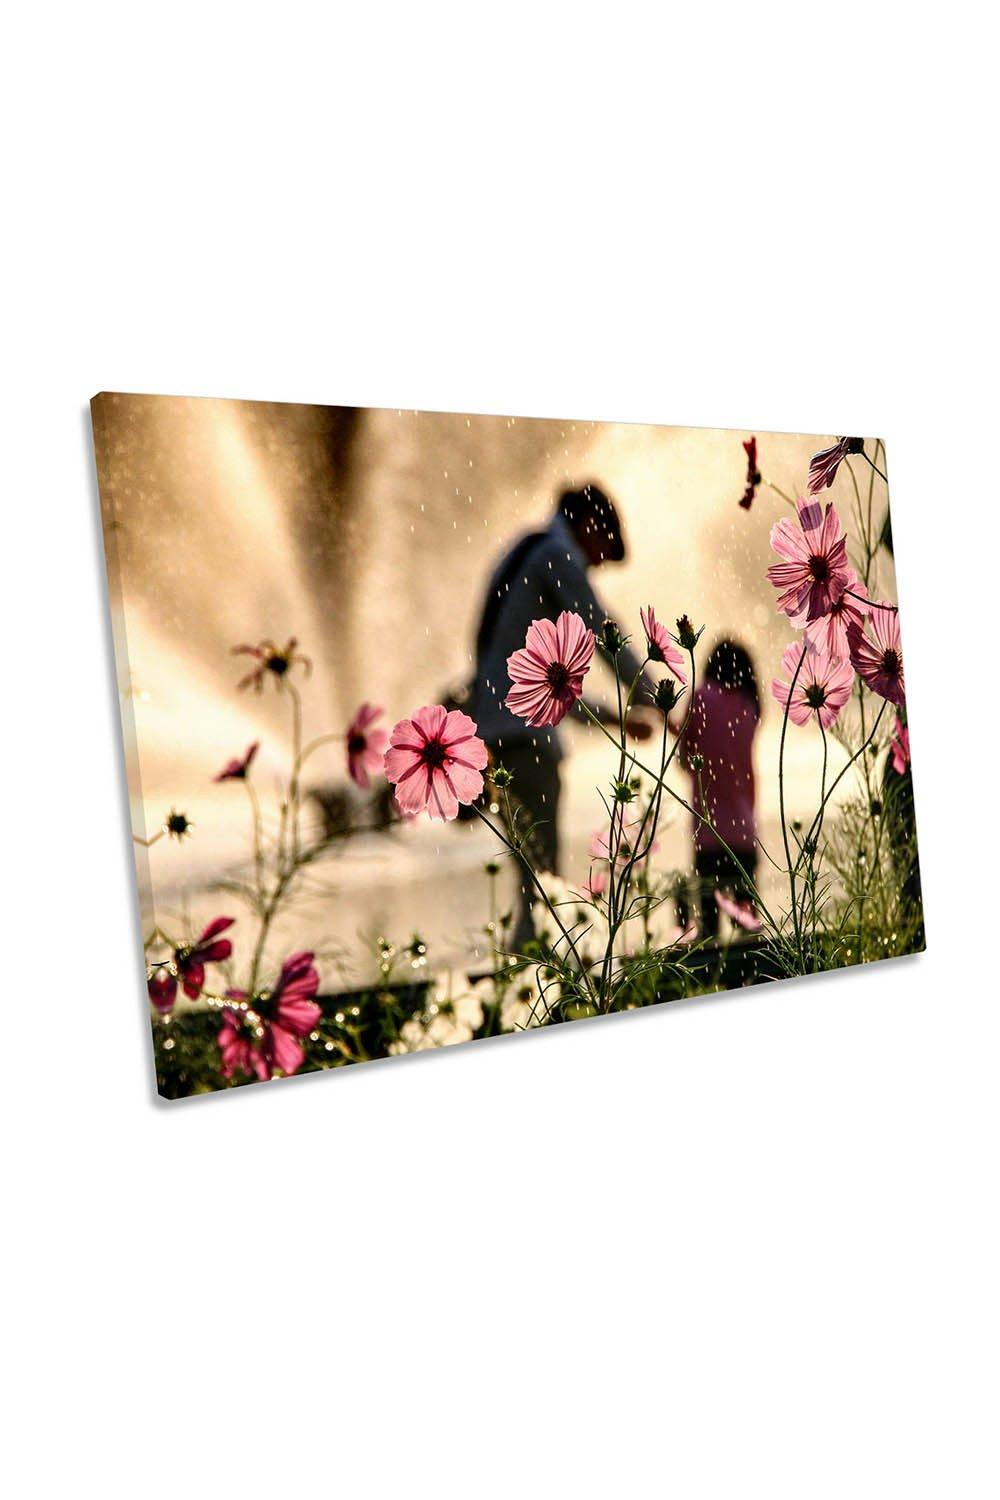 Sight in the Memory Flowers Family Canvas Wall Art Picture Print